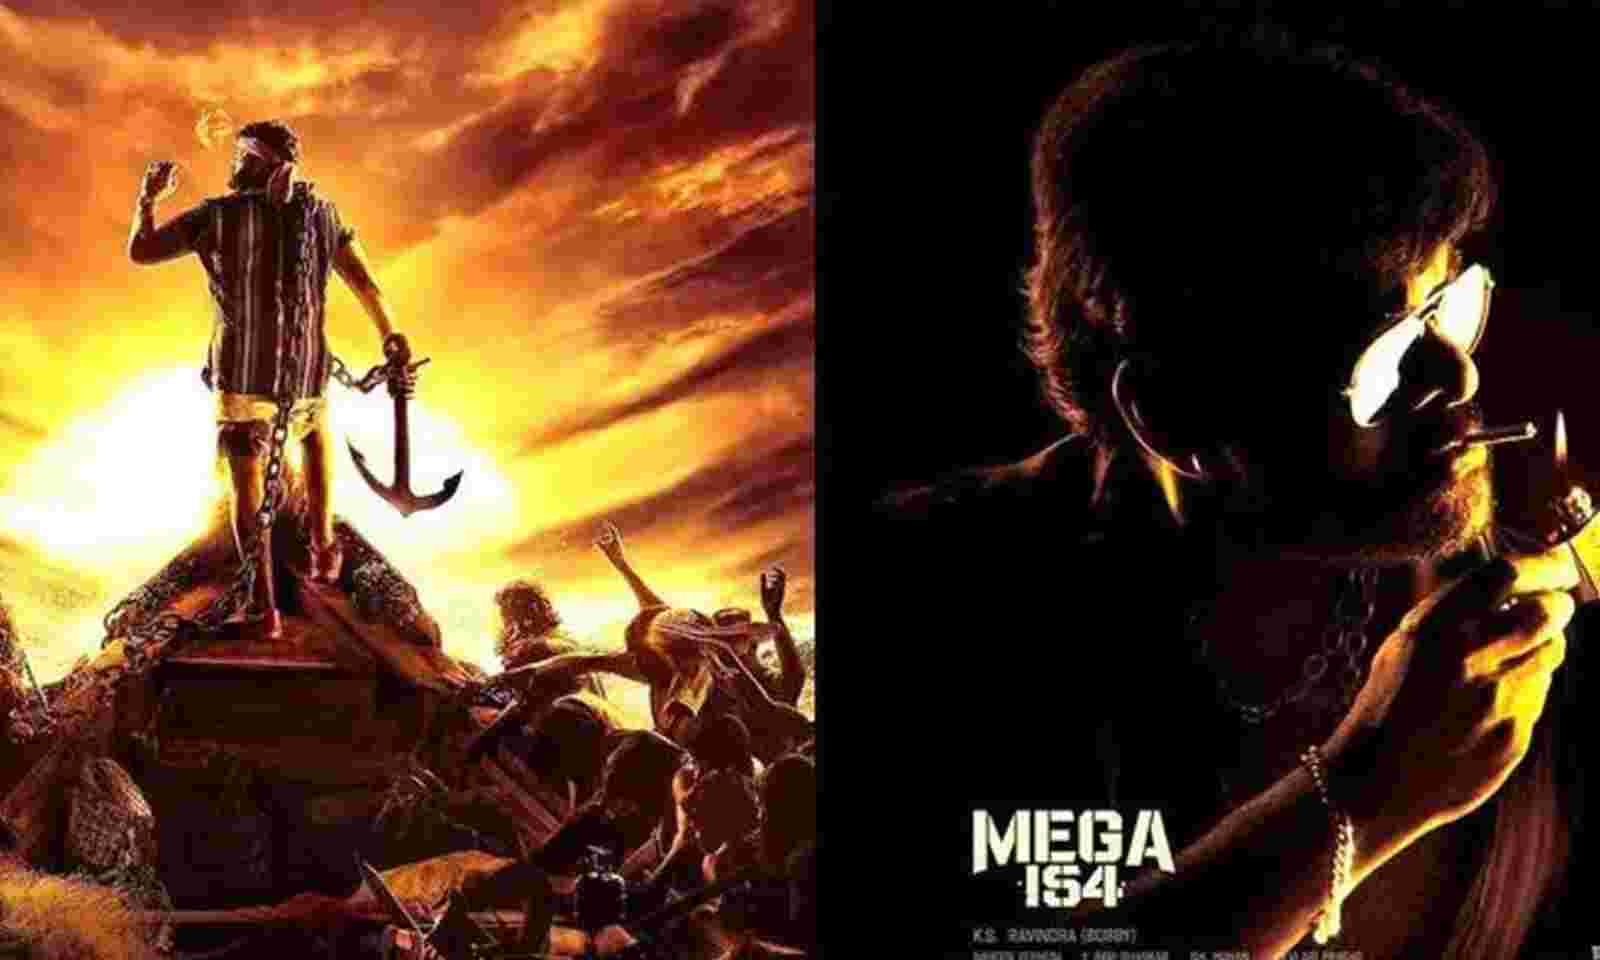 Mega 154: Chiranjeevi And Bobby's Movie Title Will Be Unveiled On This Date